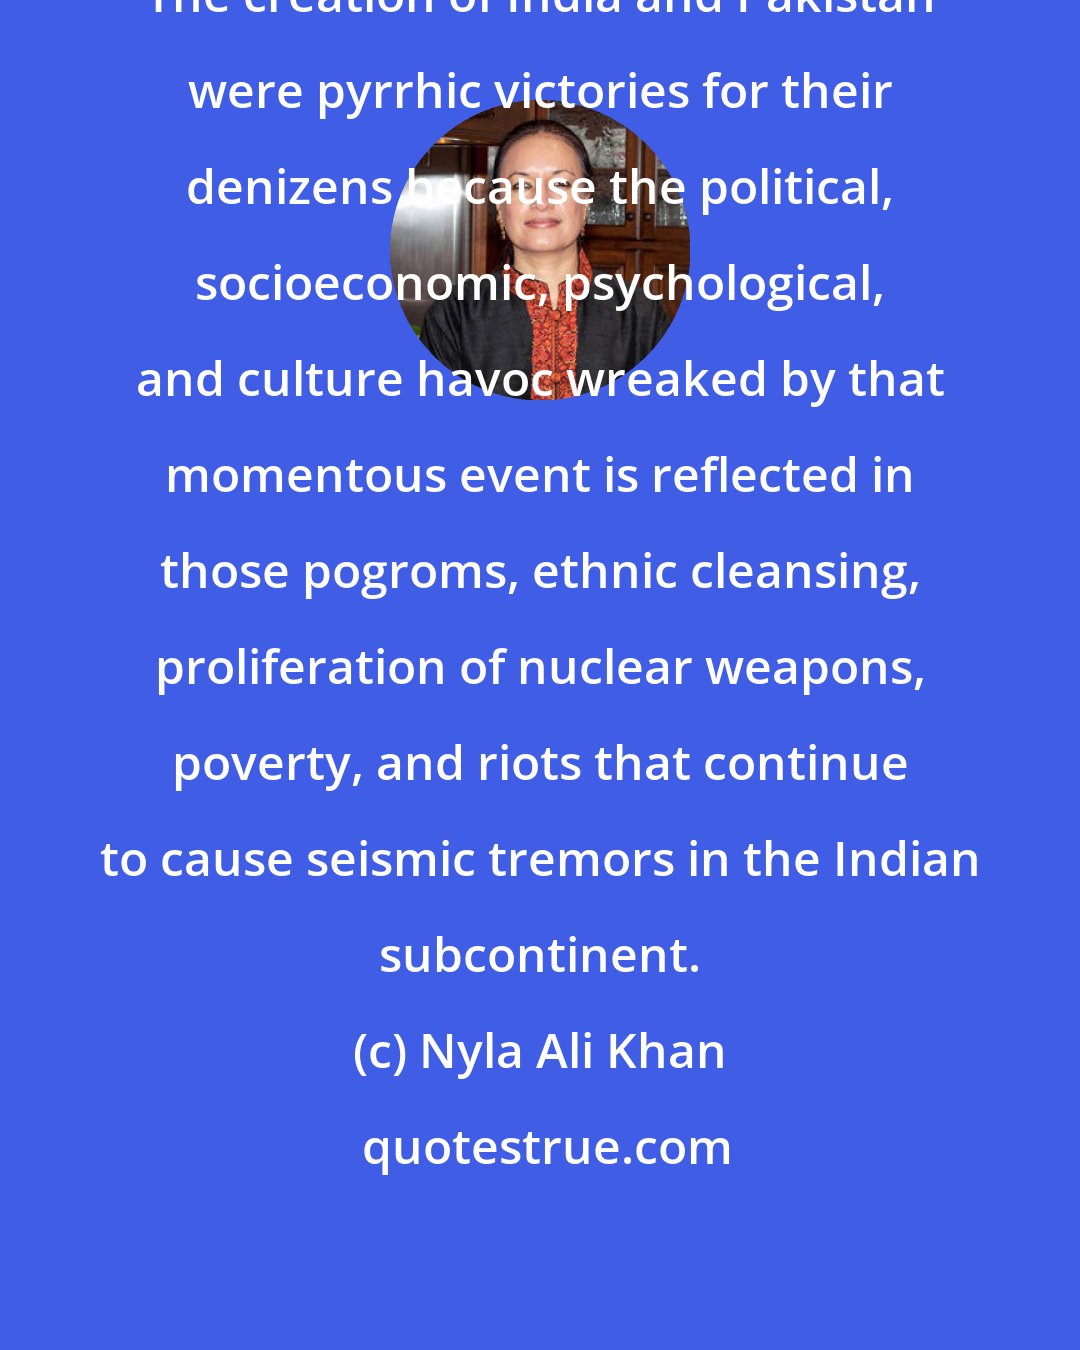 Nyla Ali Khan: The creation of India and Pakistan were pyrrhic victories for their denizens because the political, socioeconomic, psychological, and culture havoc wreaked by that momentous event is reflected in those pogroms, ethnic cleansing, proliferation of nuclear weapons, poverty, and riots that continue to cause seismic tremors in the Indian subcontinent.